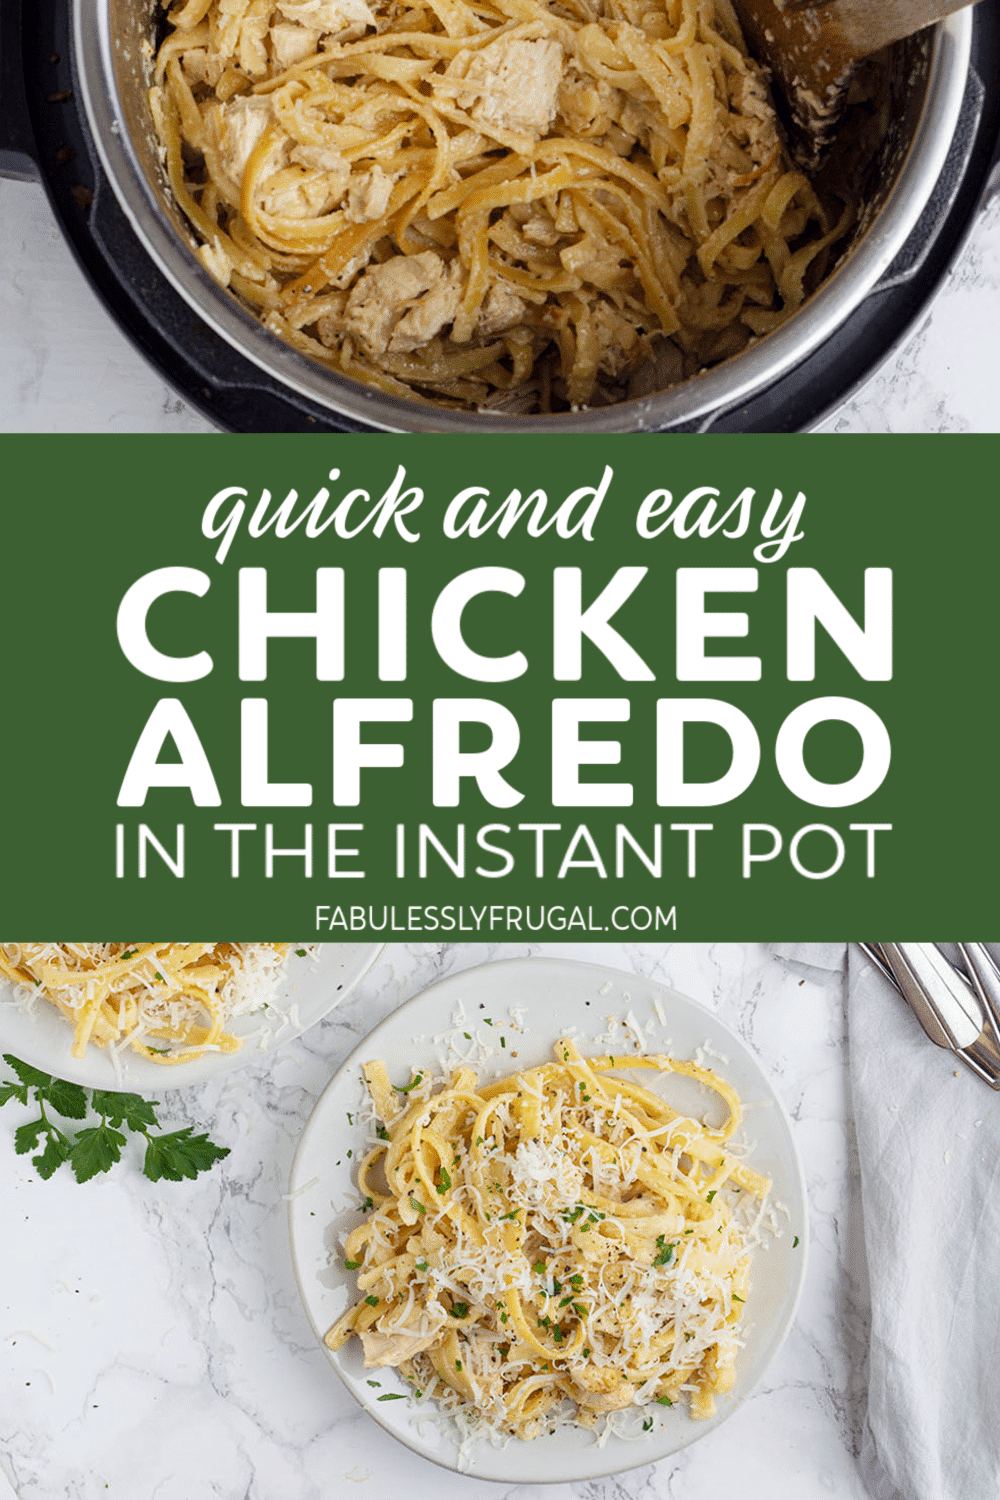 Quick and easy chicken alfredo